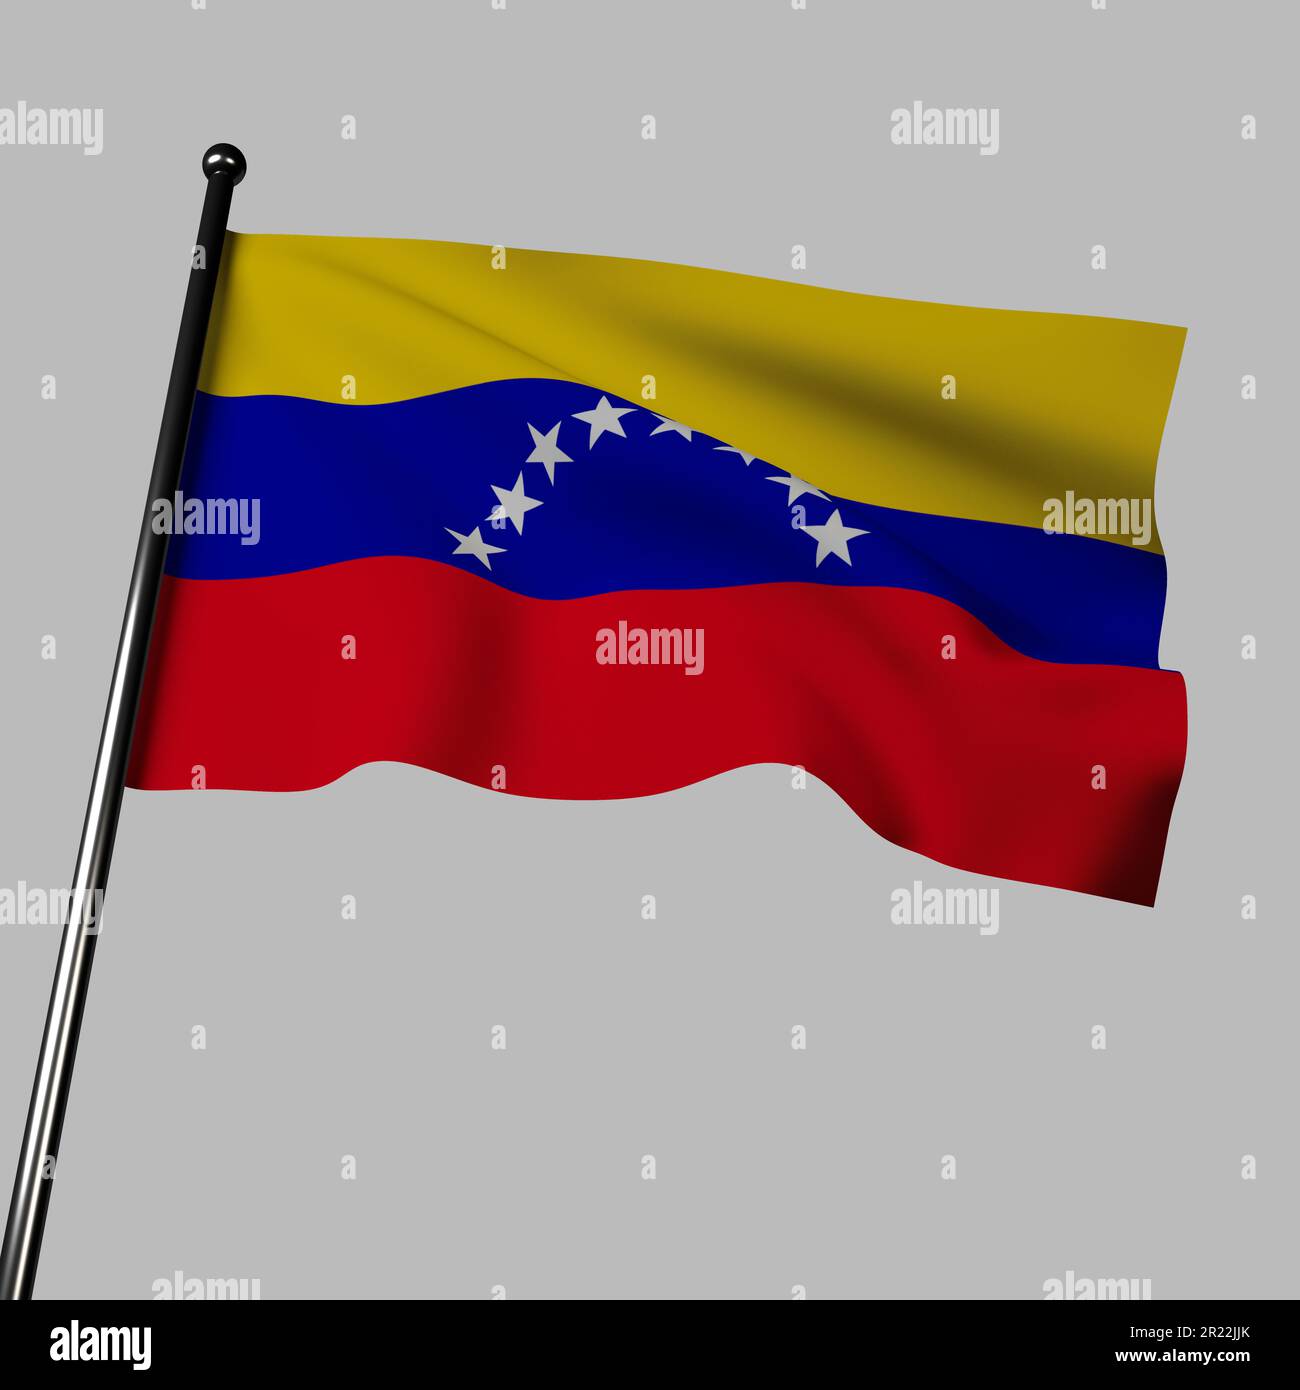 The flag of Venezuela proudly waves in 3D, against a gray background. It features horizontal bands of yellow, blue, and red Stock Photo